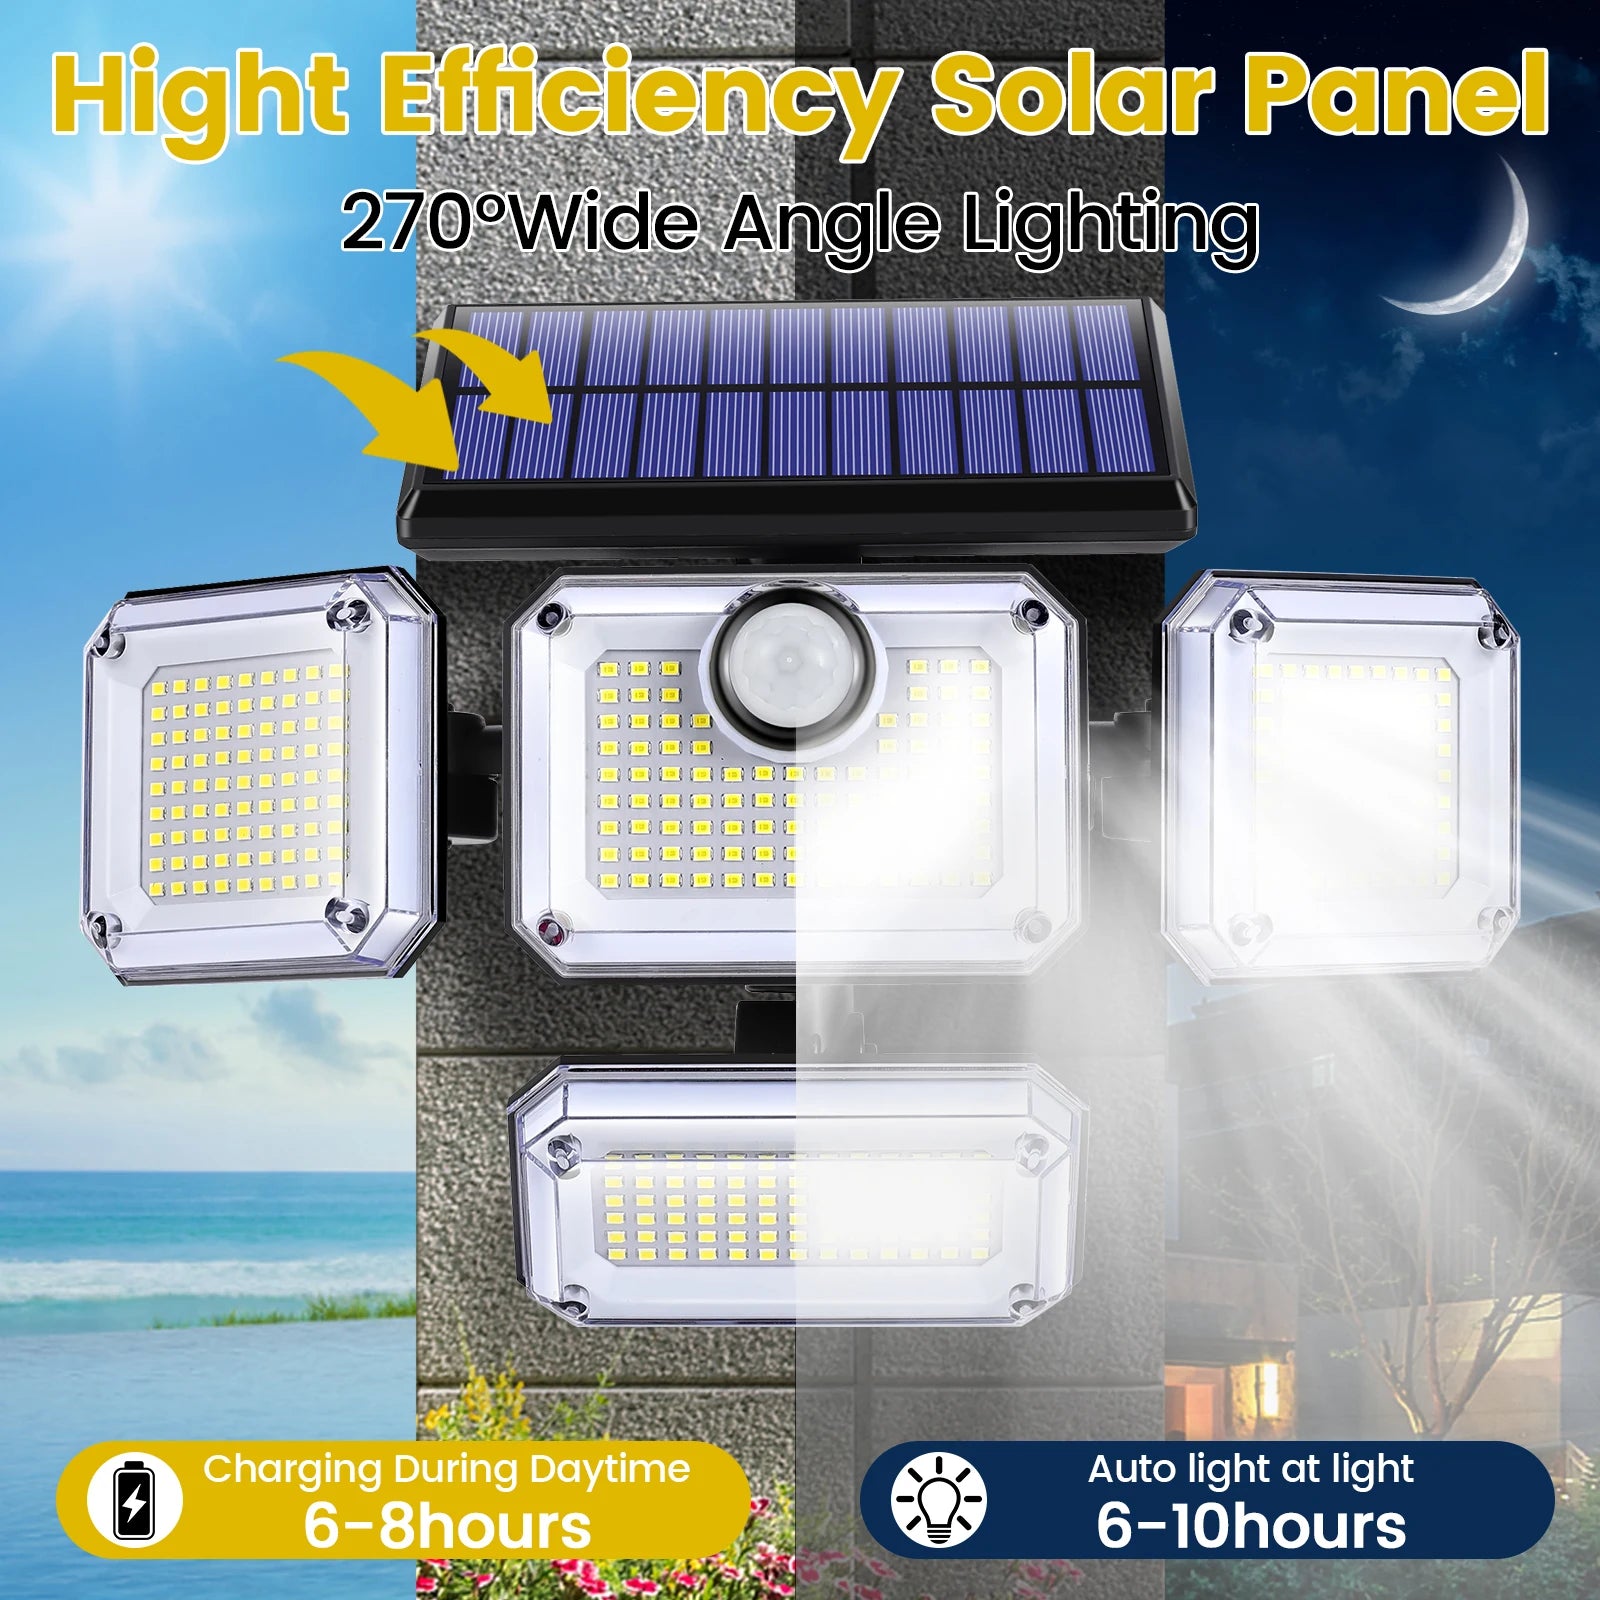 Solar Light, Efficient solar panel with wide-angle lighting, charging during day and illuminating for 6-10 hours.